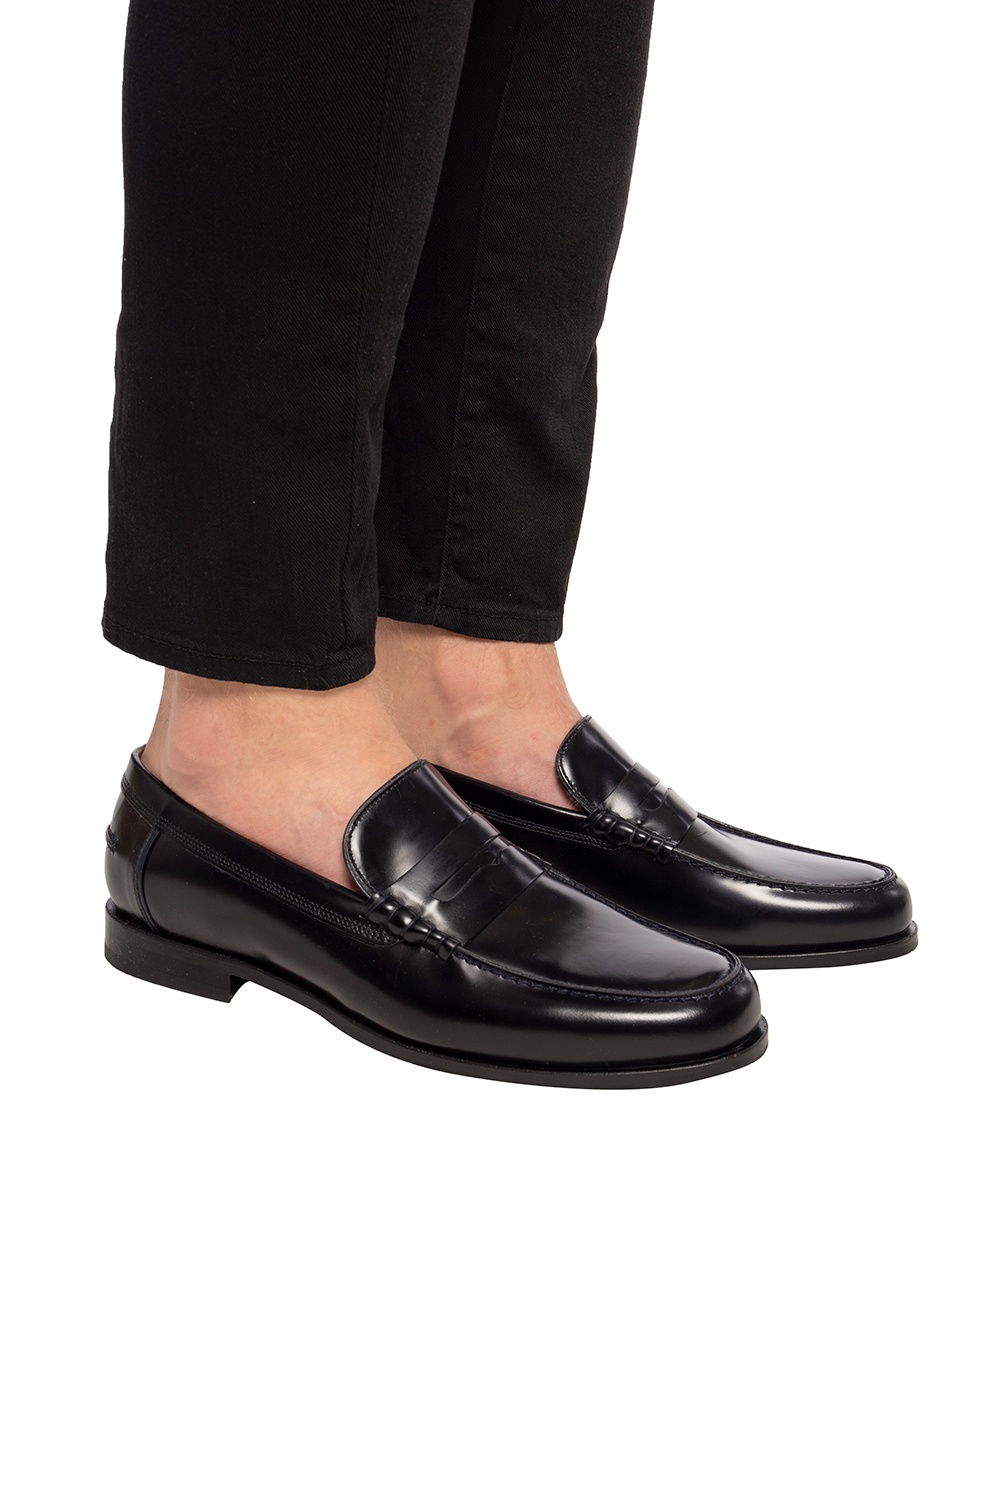 Teddy' leather loafers PS Paul Smith 